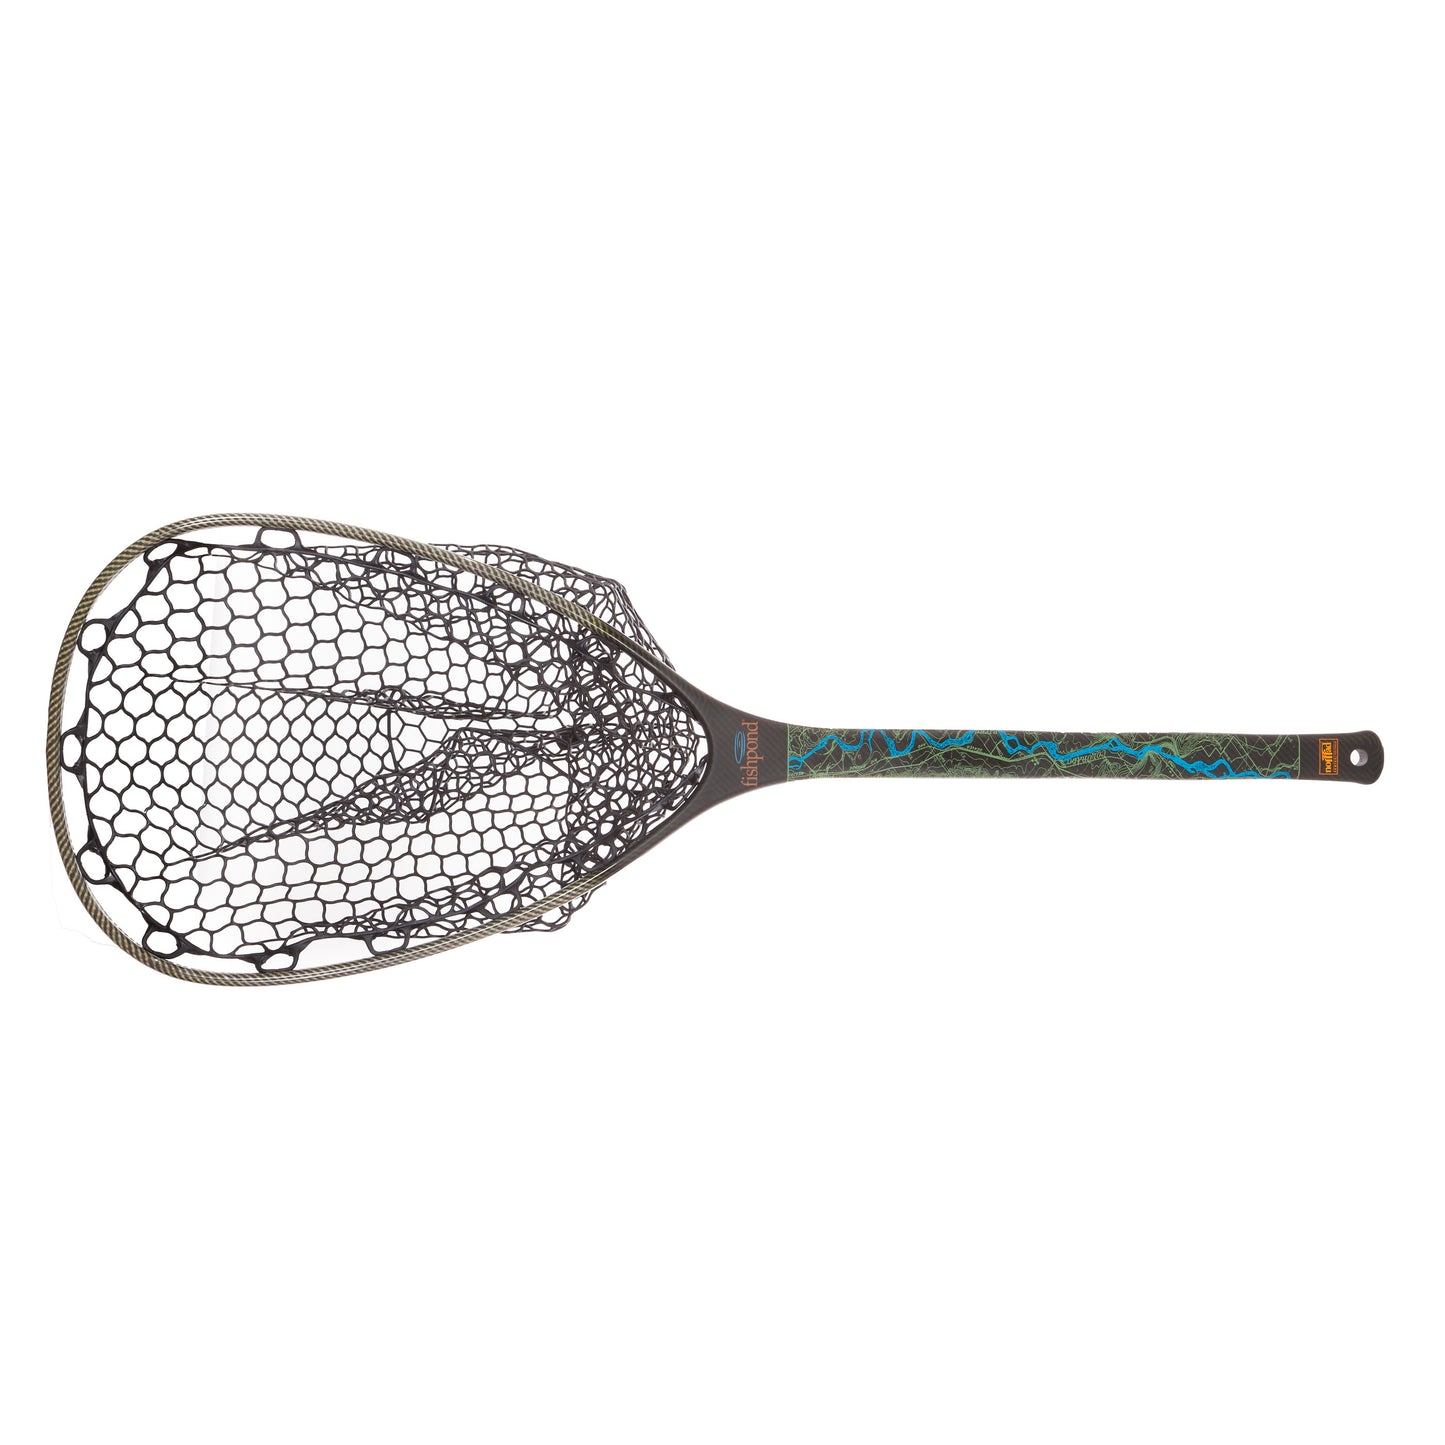 FISHPOND Nomad Mid-Length Net - Limited Edition - Total Outfitters